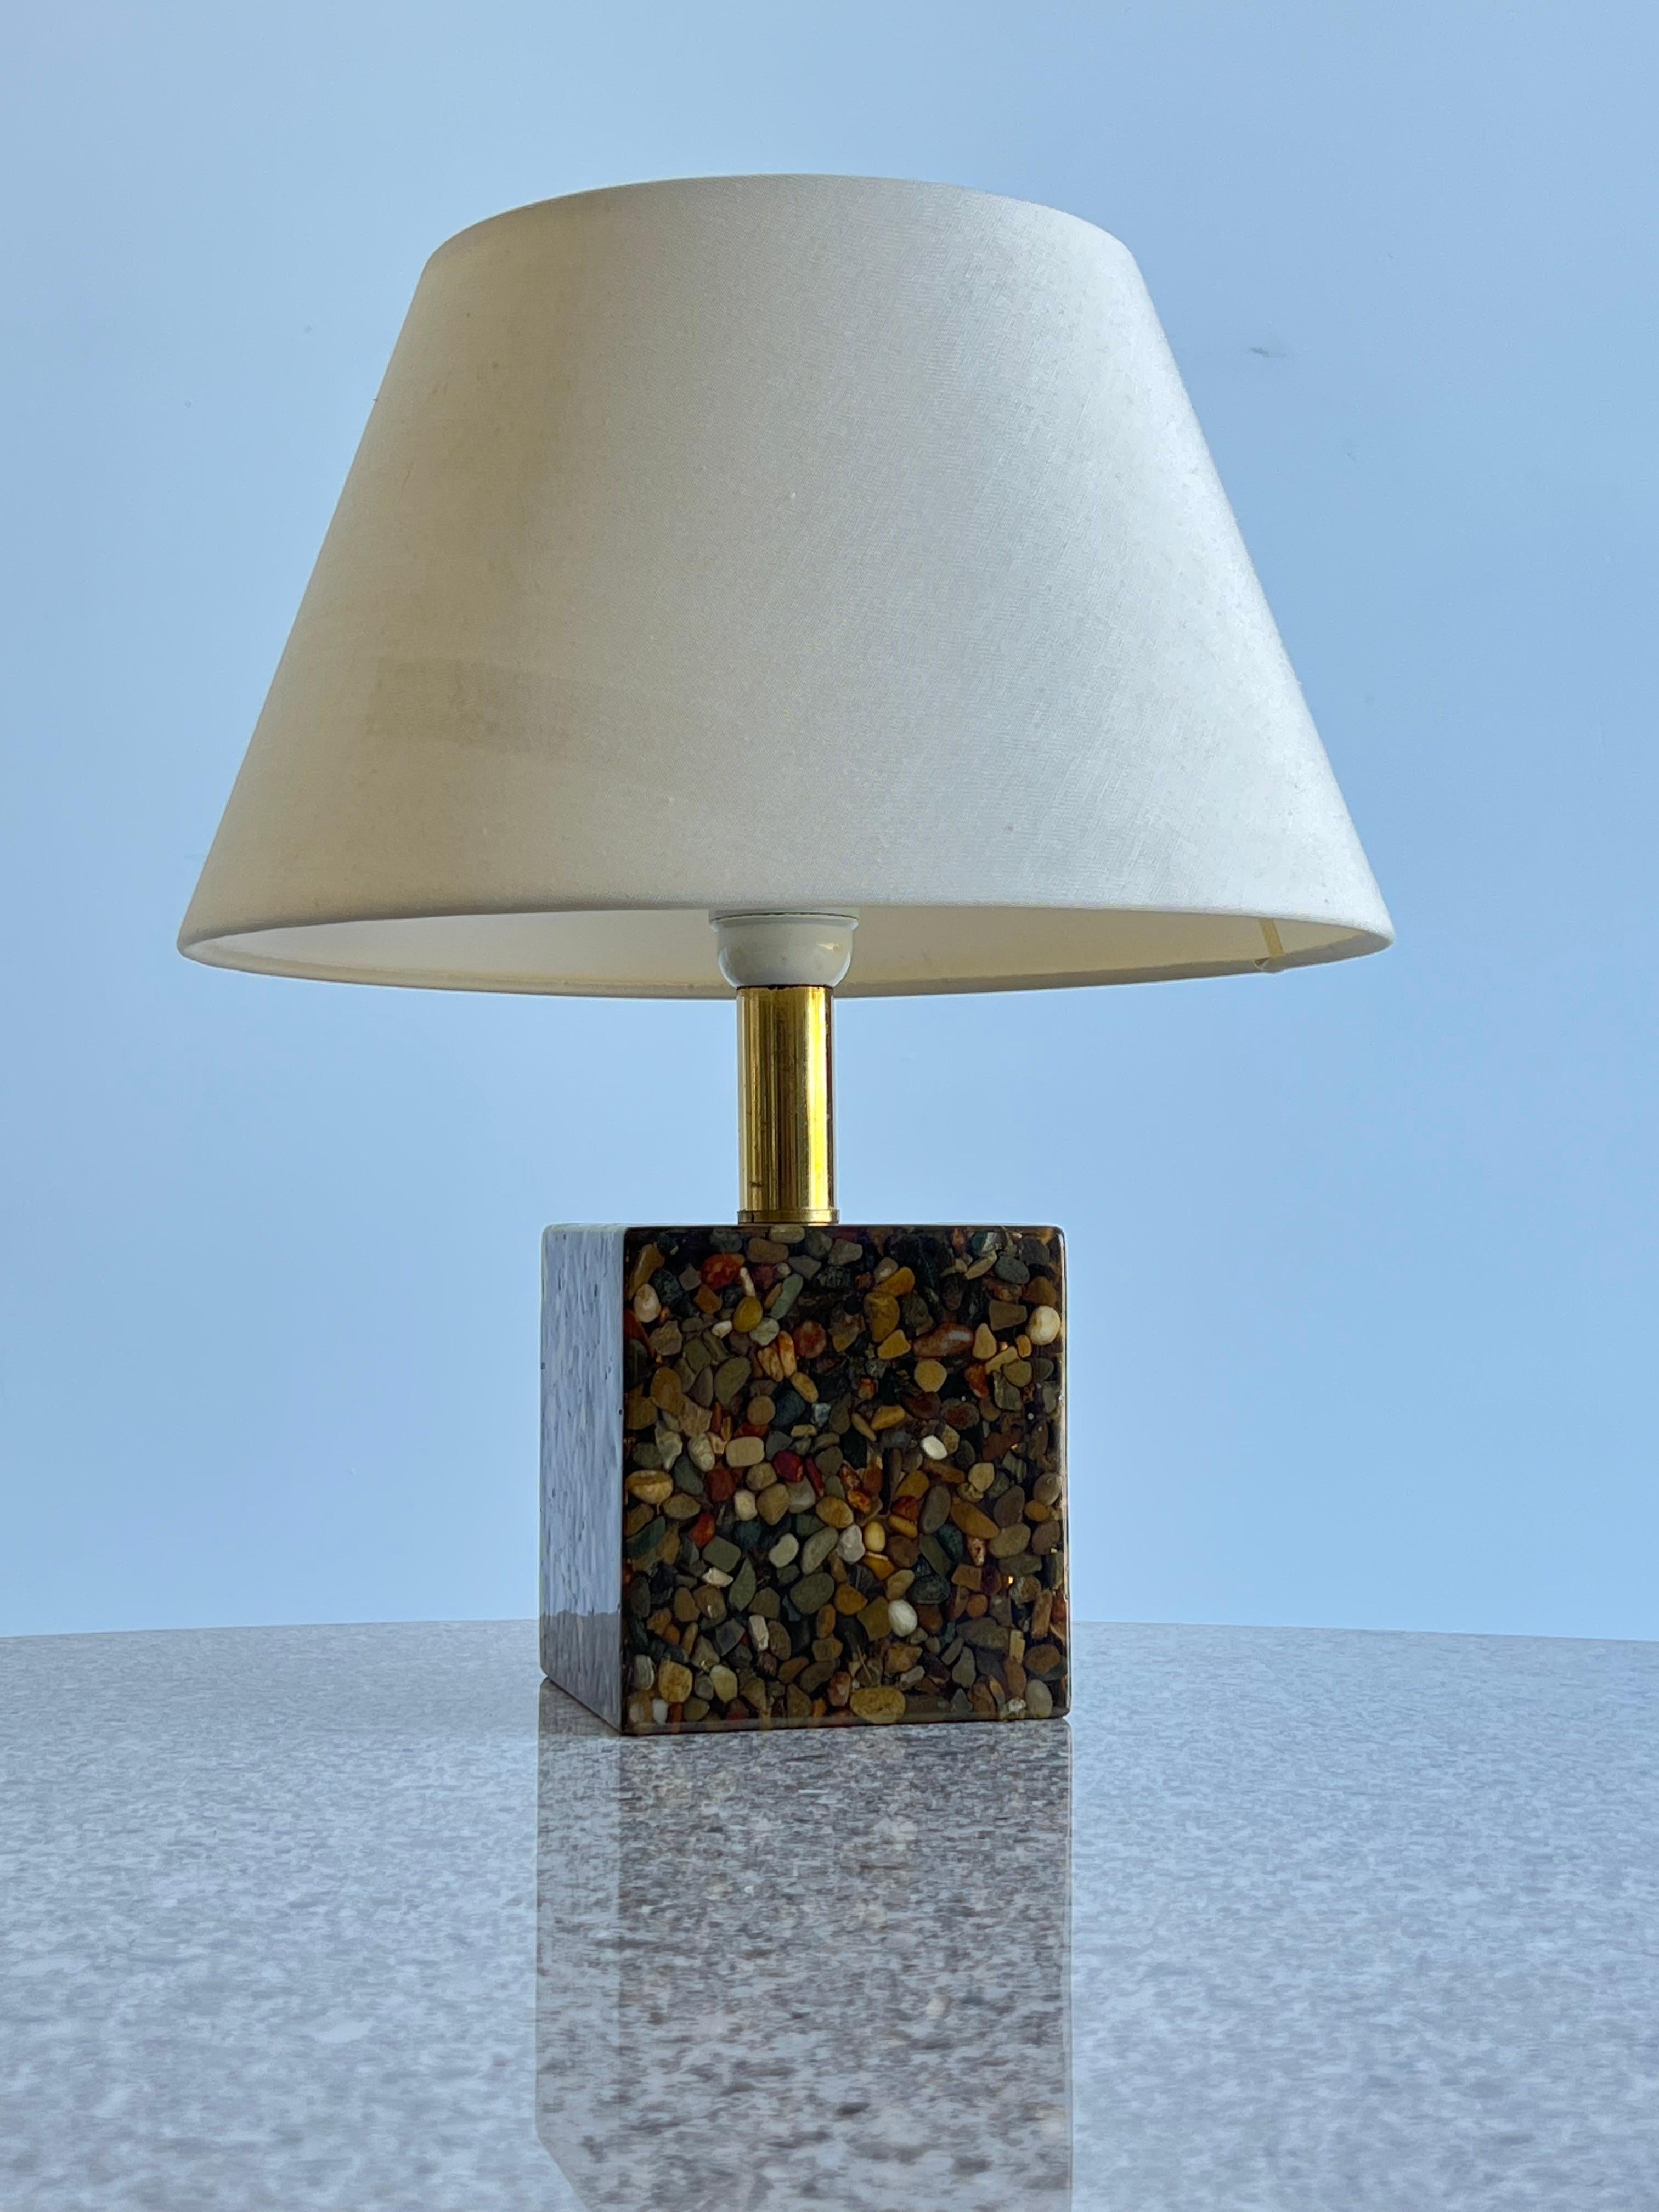 Set of two bed side lamps in epoxy resin with stones and brass by Arte Luce 1970s.
Very beautiful lamps by Arte Luce perfect for a bad side lamps.
Perfect working condition original shades.
 